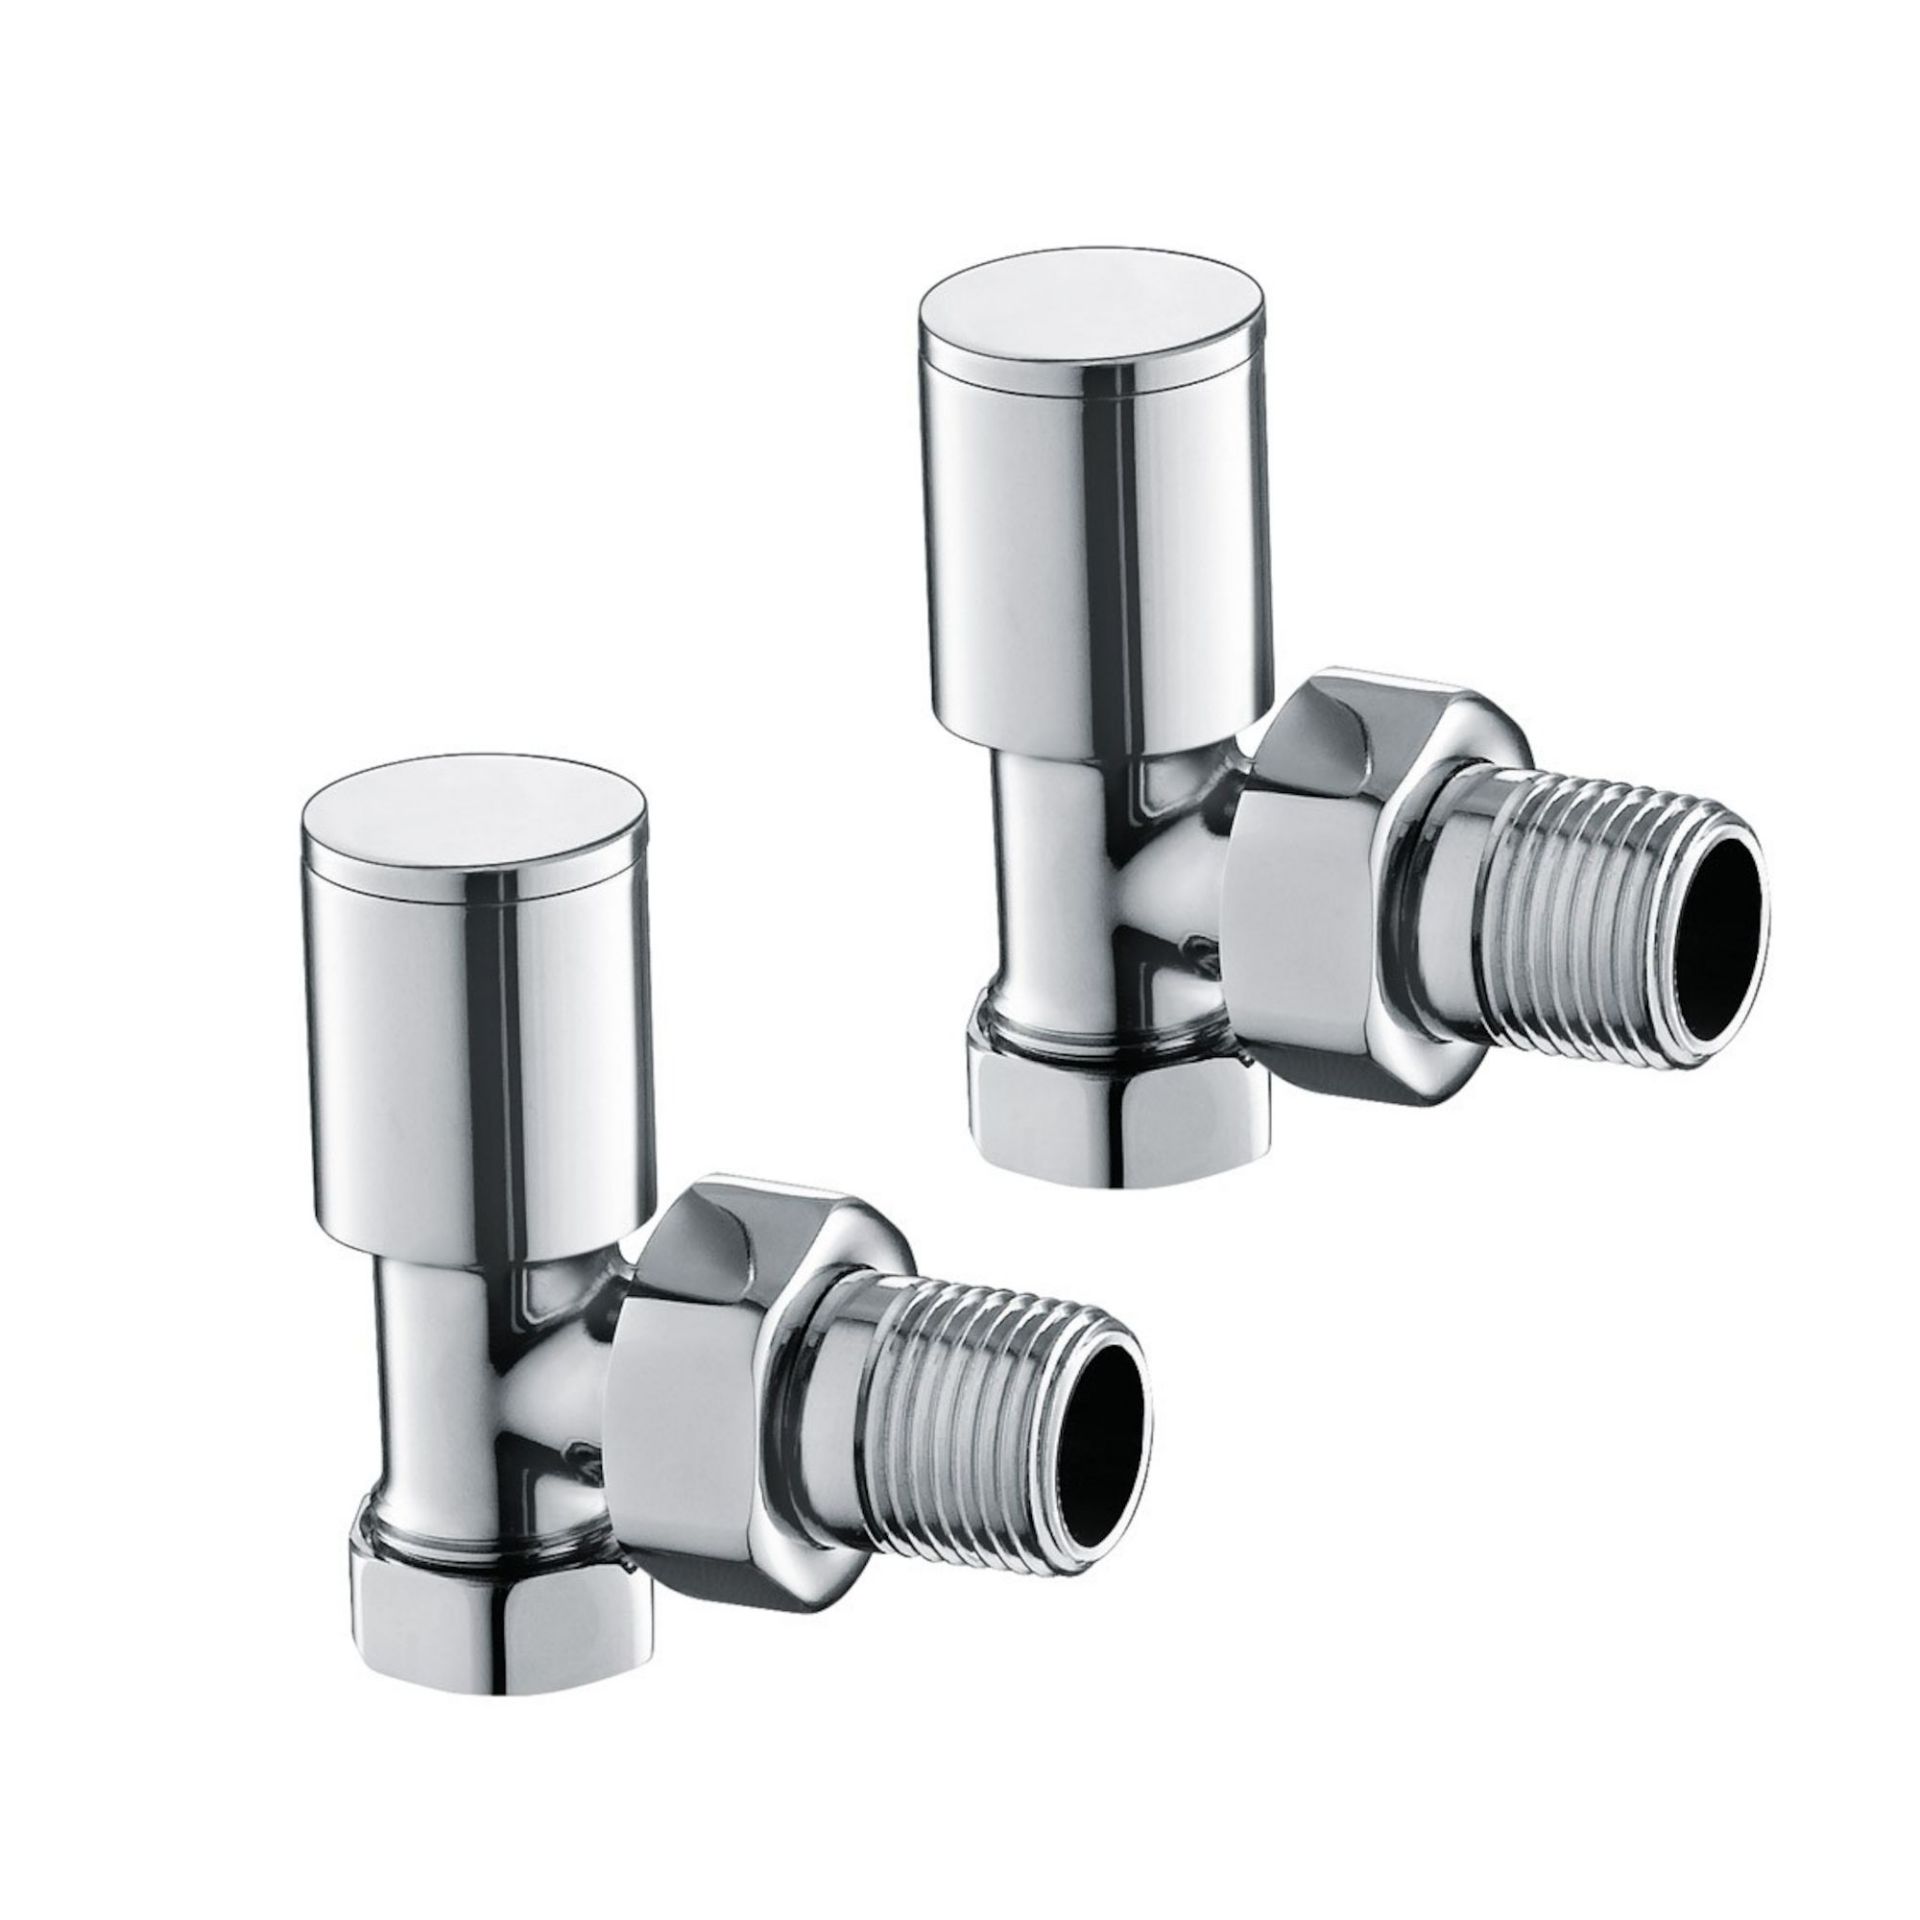 NEW (NV1000) 15mm Standard Connection Angled Radiator Valves - Heavy Duty Polished Chrome Plate... - Image 2 of 2